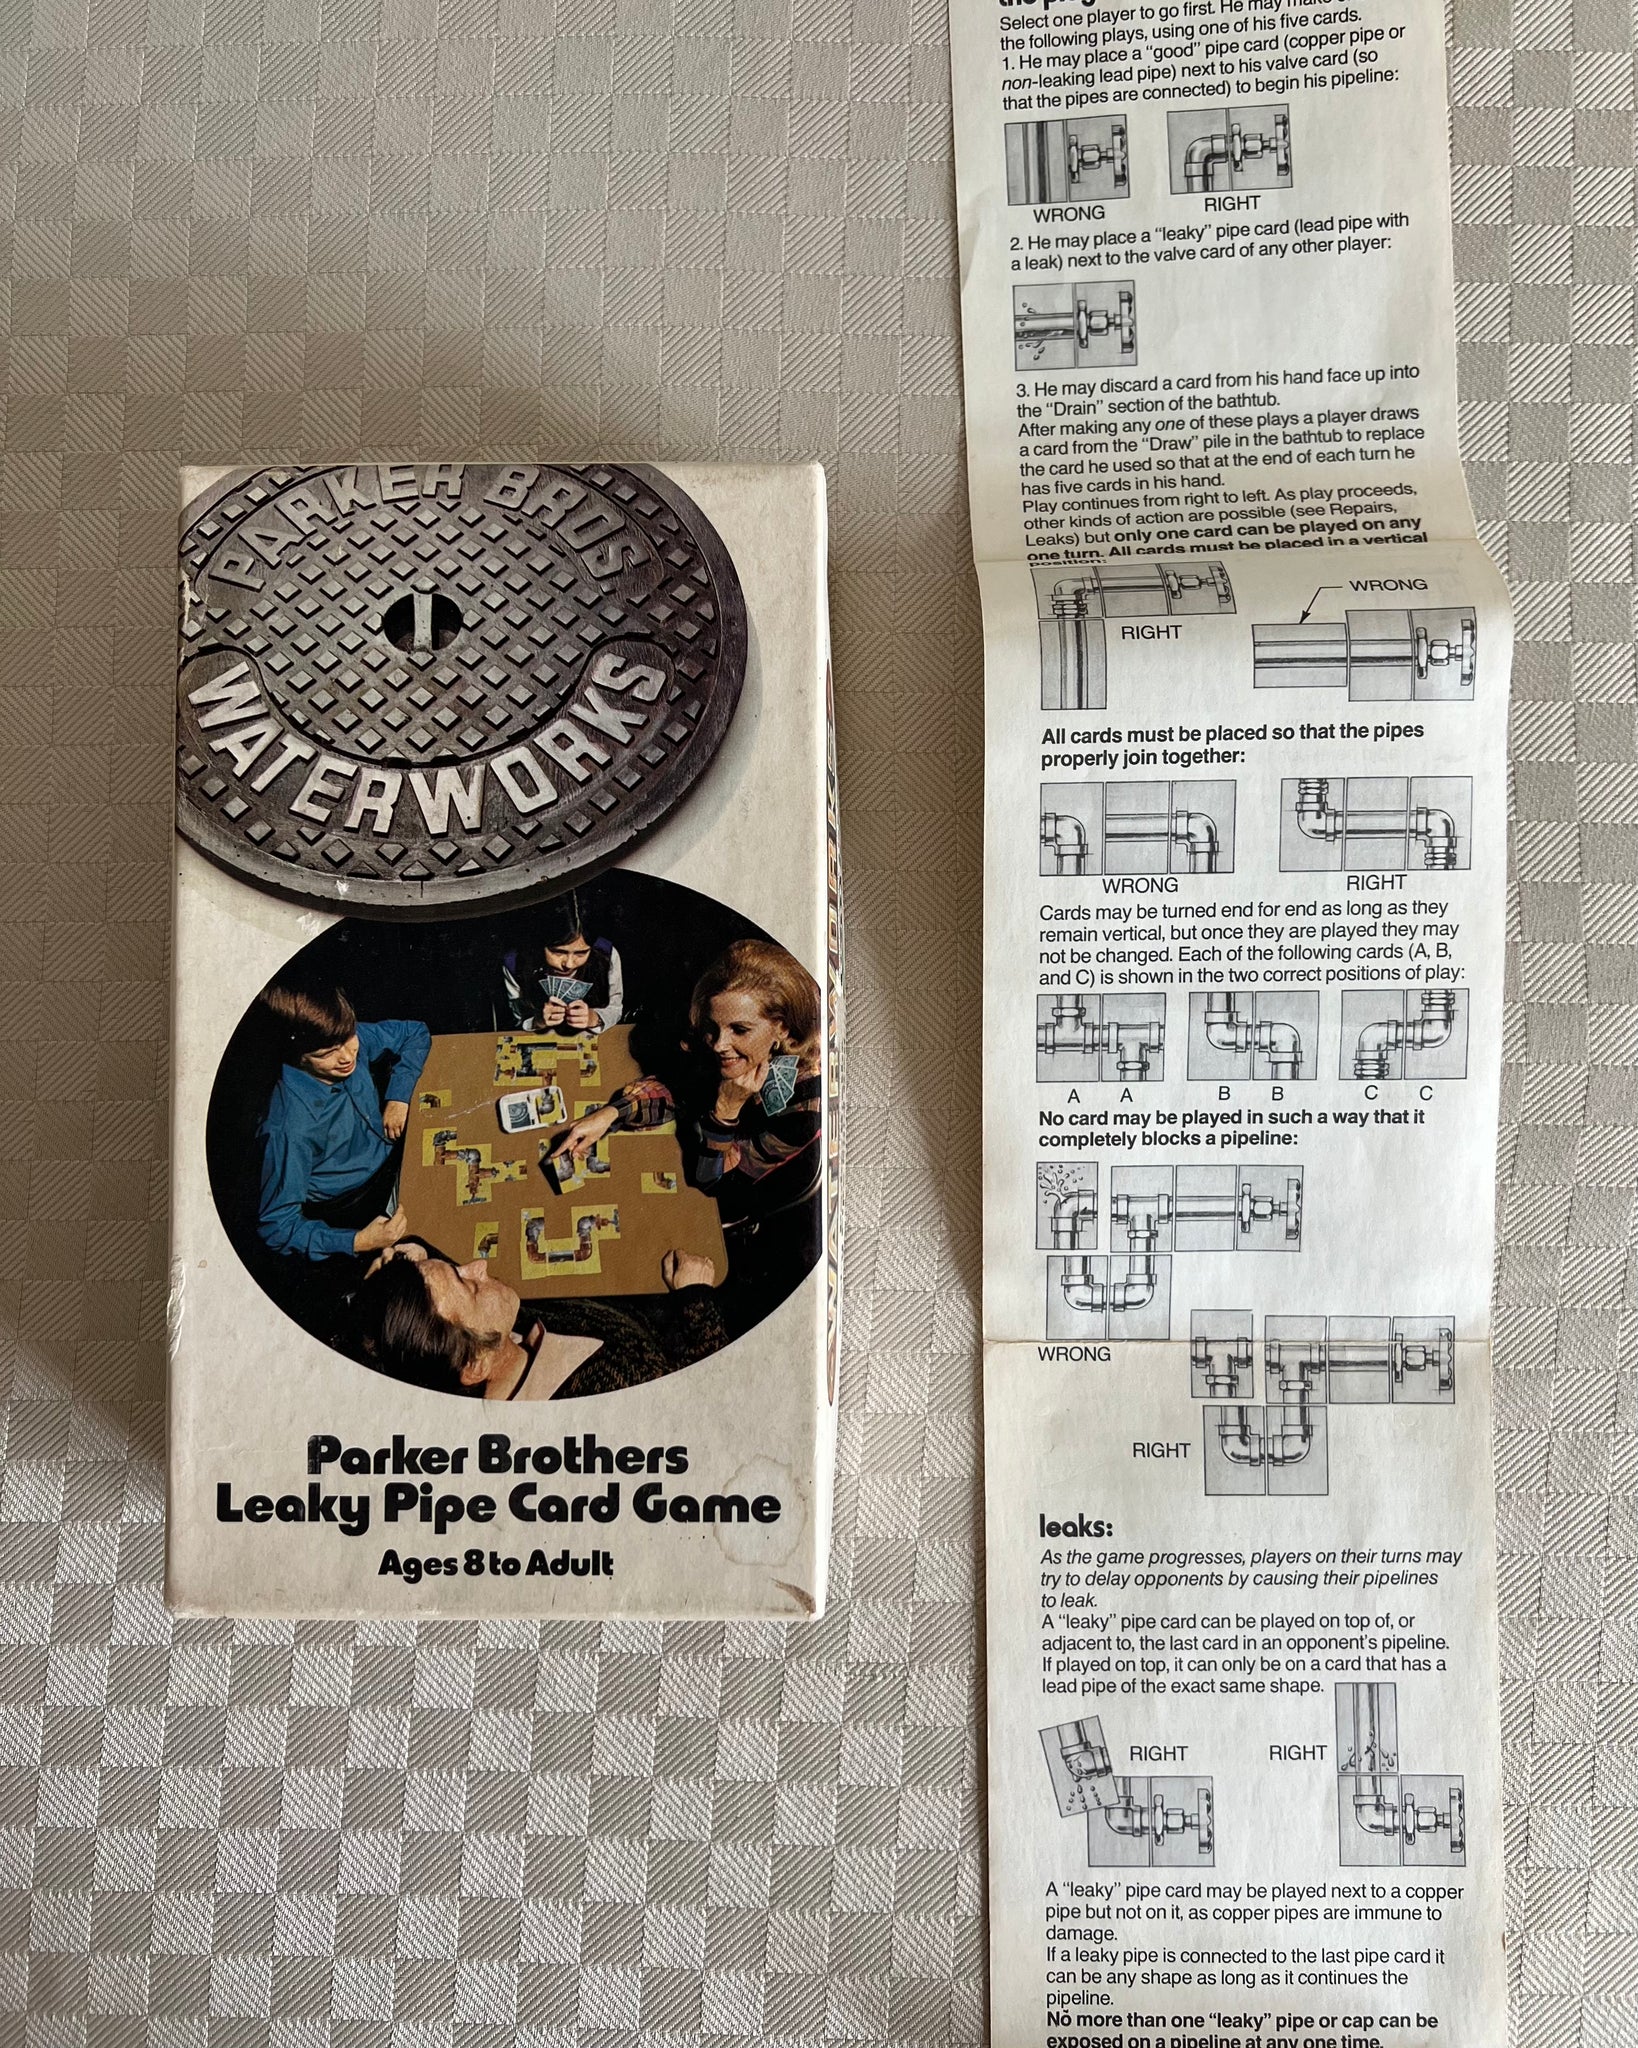 70s Parker Brothers “Waterworks” Card Game